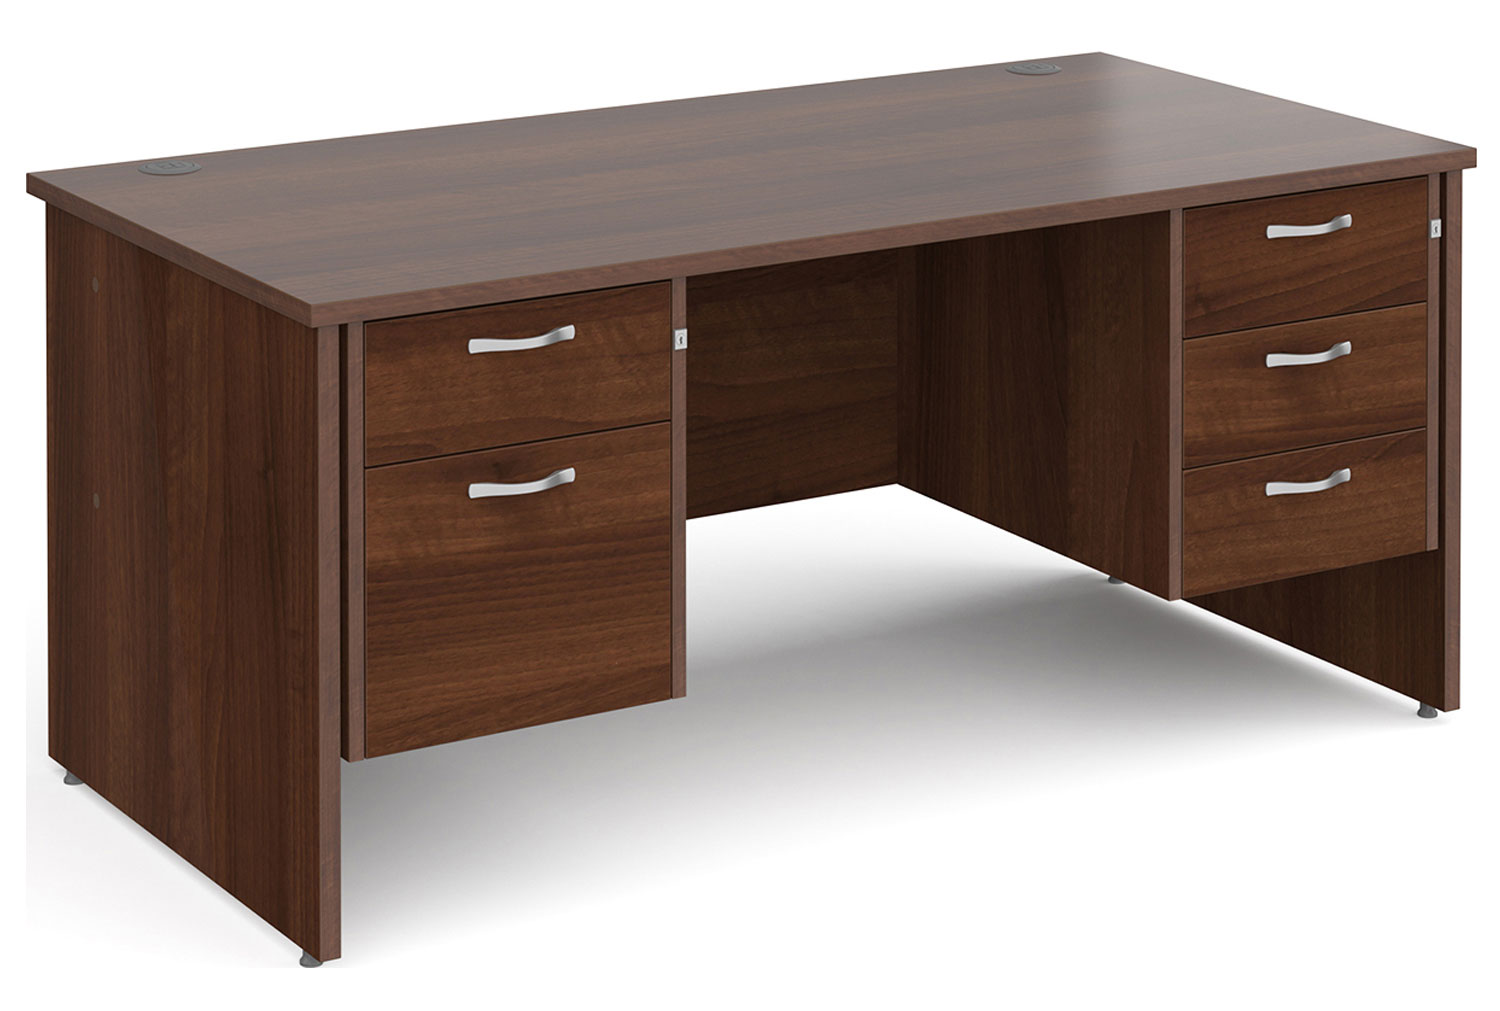 All Walnut Panel End Executive Office Desk 2+3 Drawers, 160wx80dx73h (cm), Fully Installed